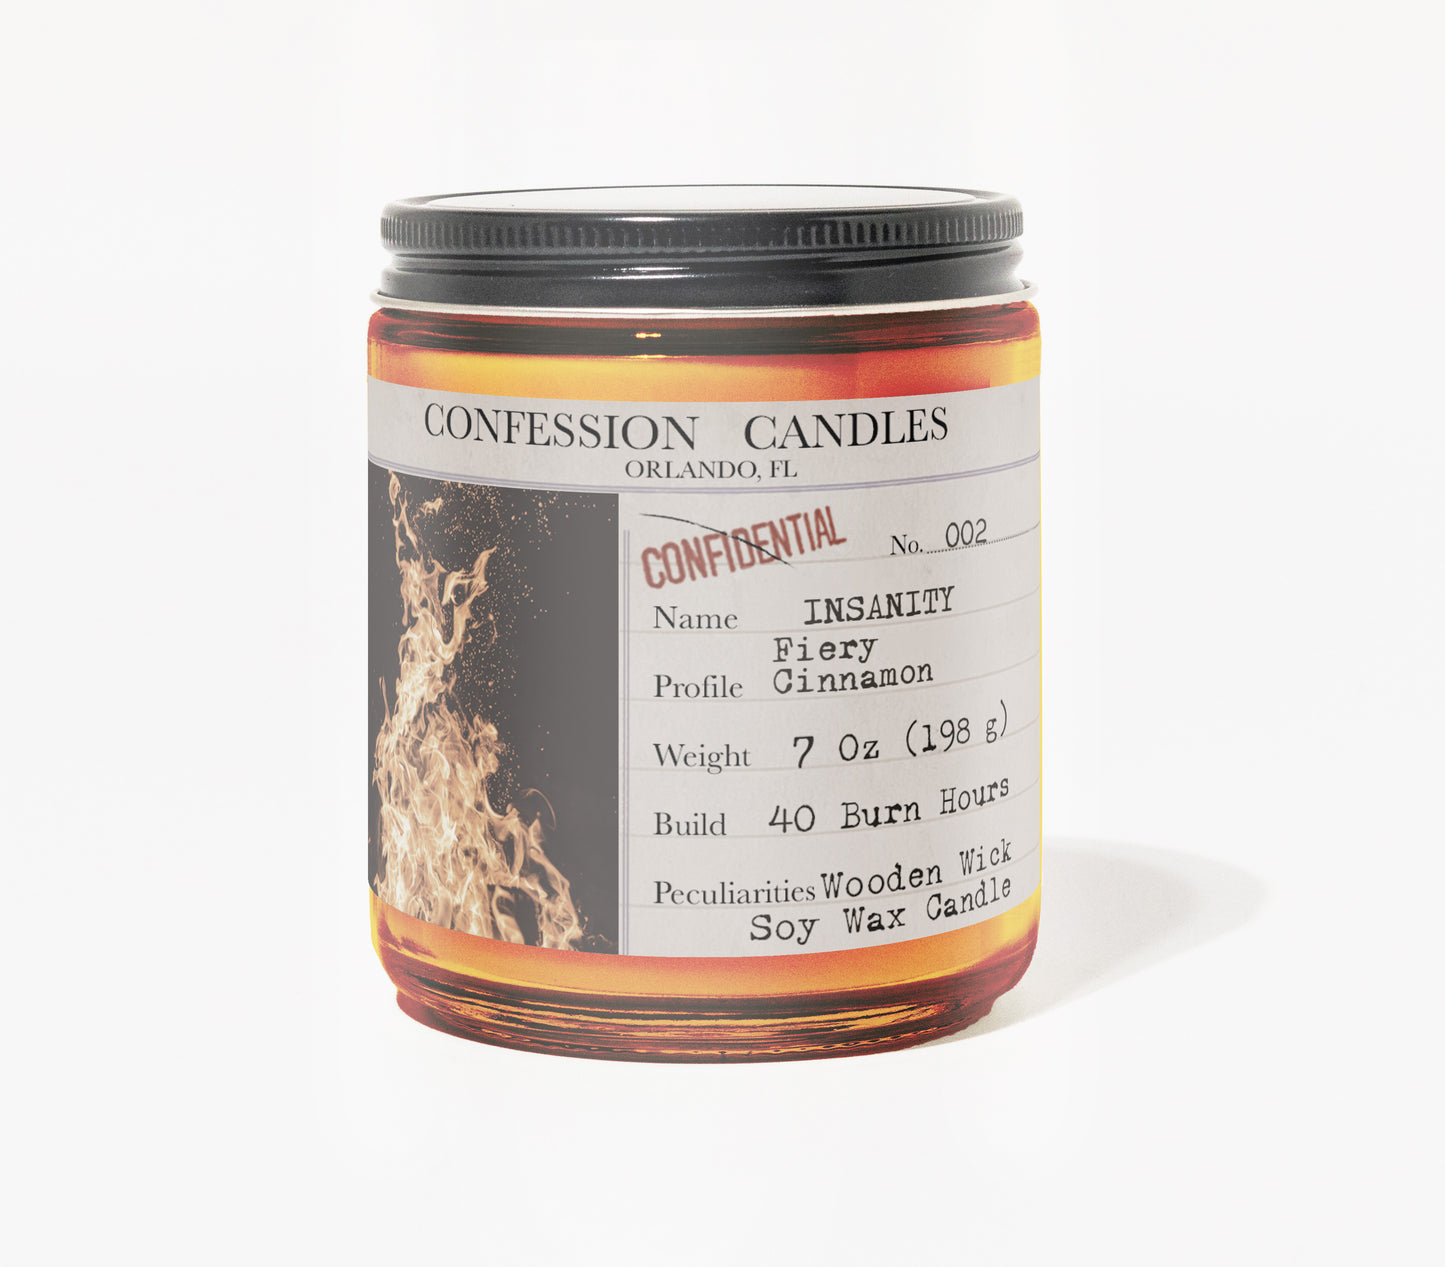 Insanity Candle Jar 002 | Confession Candles 7 oz Soy Wax Blend Candle | Fiery Cinnamon | True Crime Wood Wick Candle in a Brown Glass Jar | 40+ Burn Hours